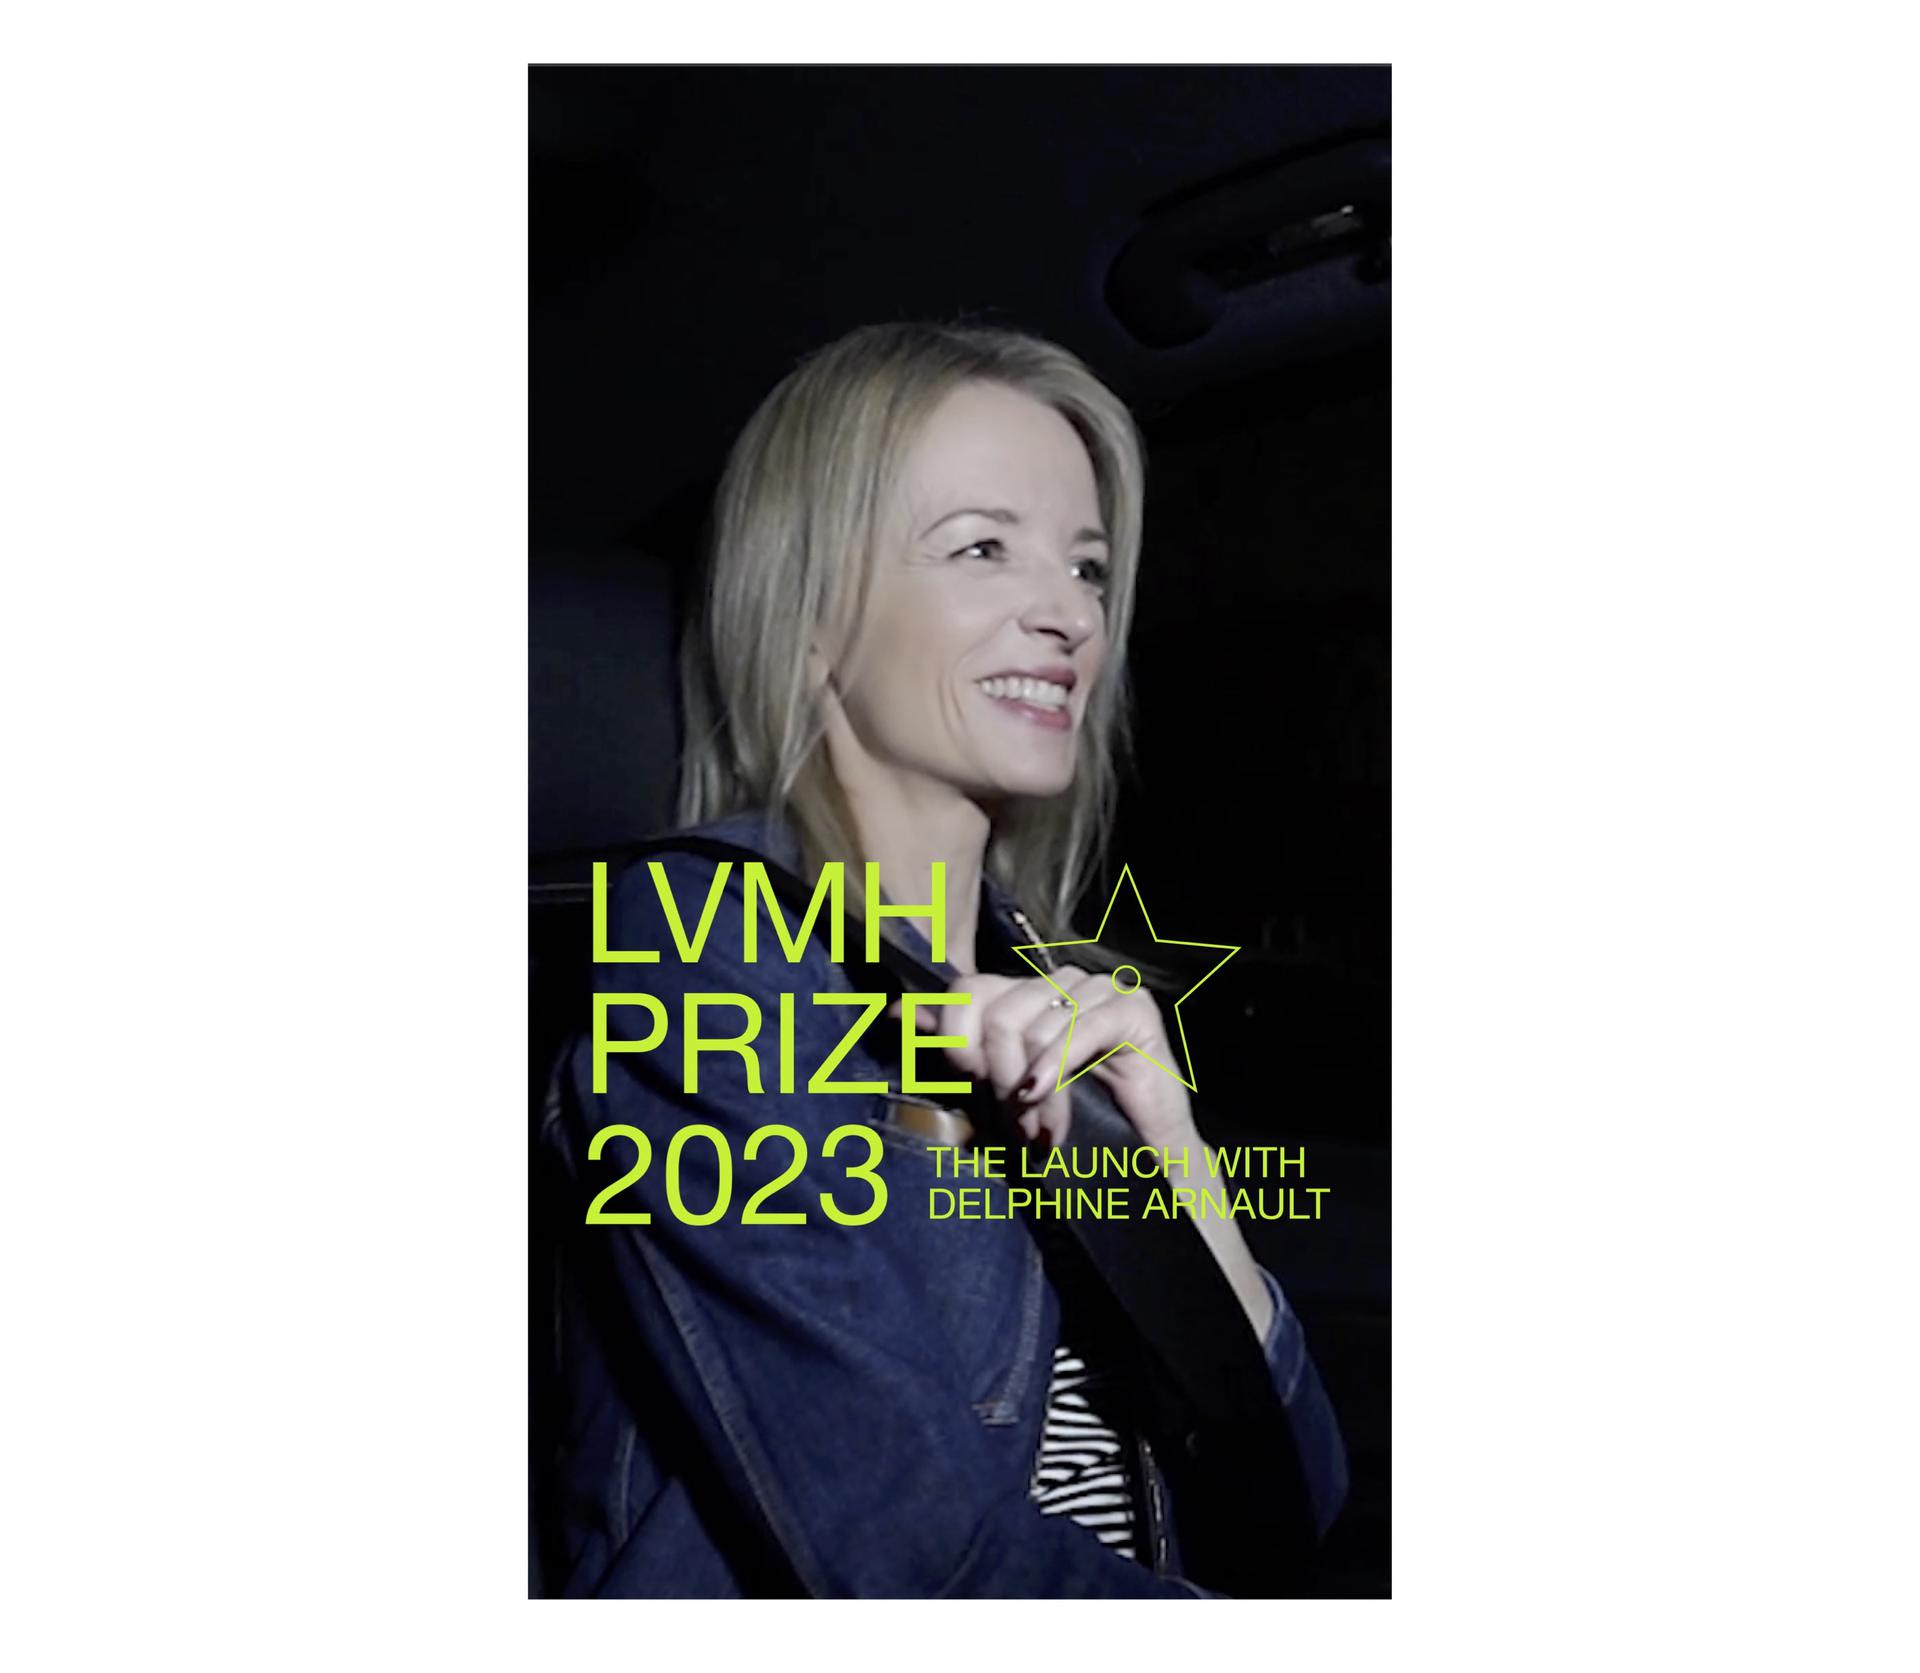 The LVMH Prize for Young Fashion Designers - Initiative LVMH